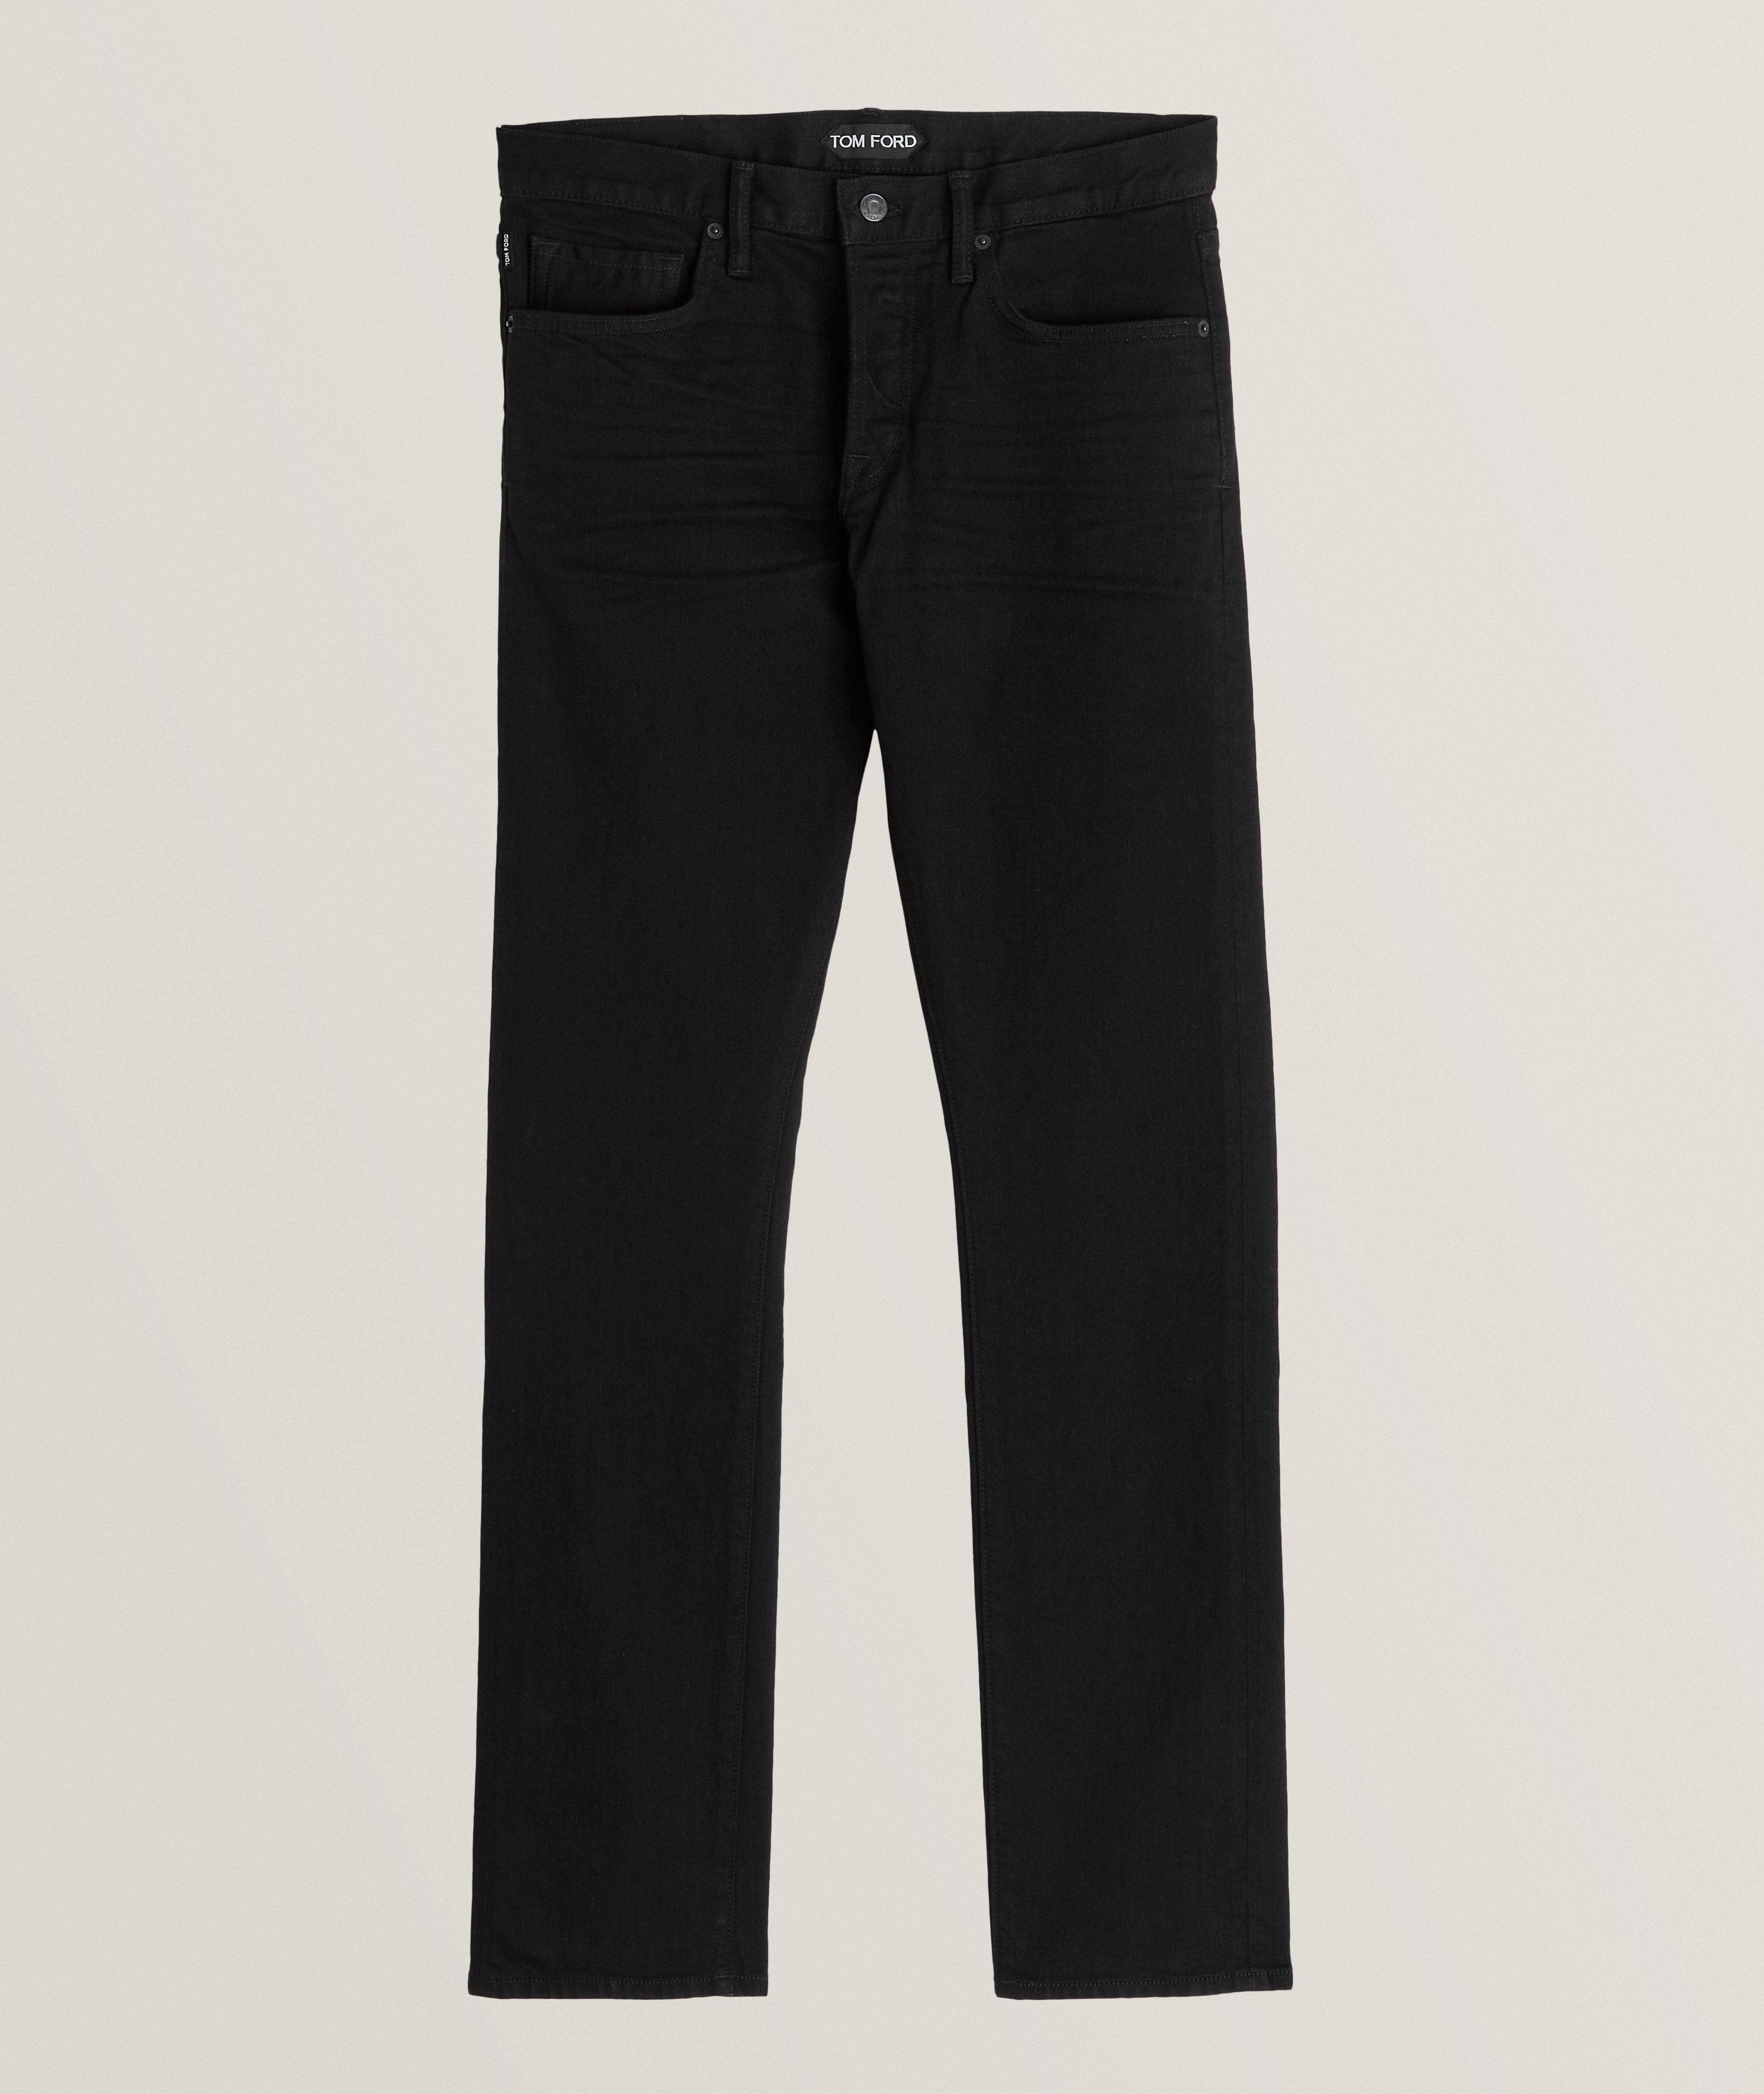 TOM FORD Slim-Fit Stretch-Cotton Jeans